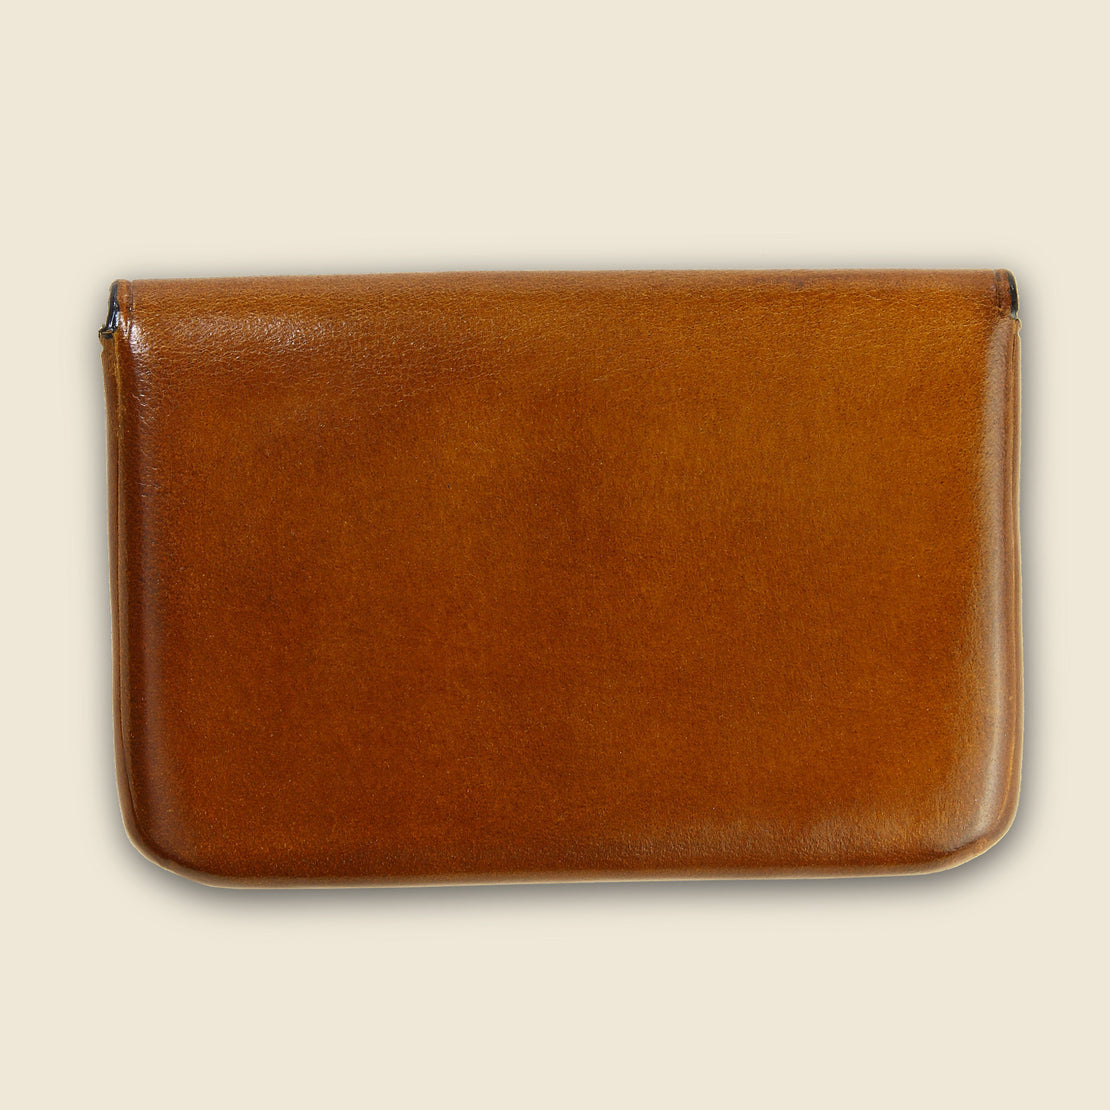 Business Card Holder - Light Brown - Il Bussetto - STAG Provisions - Accessories - Wallets